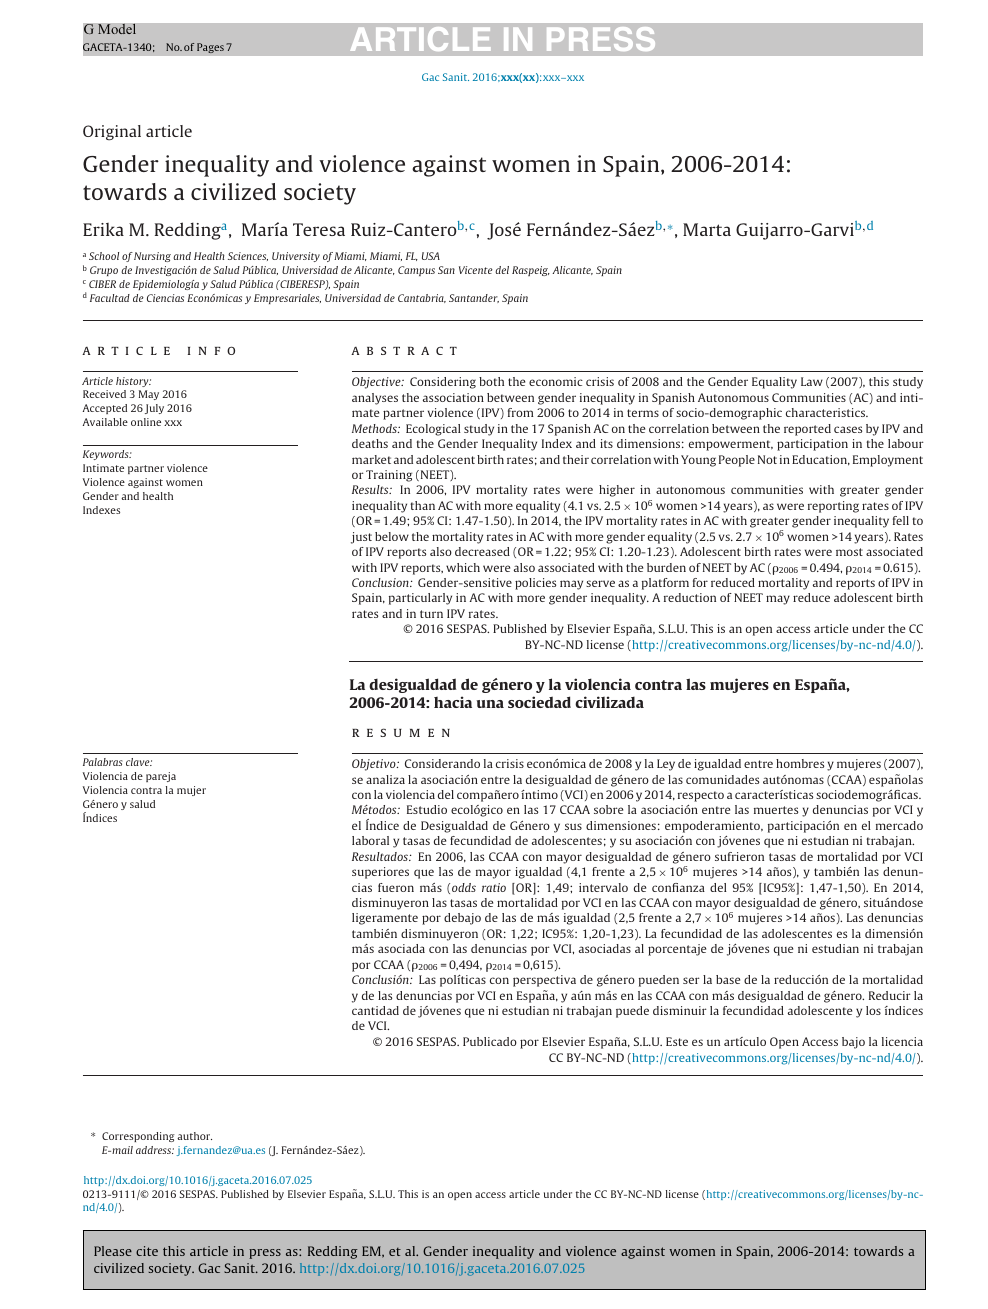 Gender Inequality And Violence Against Women In Spain 06 14 Towards A Civilized Society Topic Of Research Paper In Sociology Download Scholarly Article Pdf And Read For Free On Cyberleninka Open Science Hub